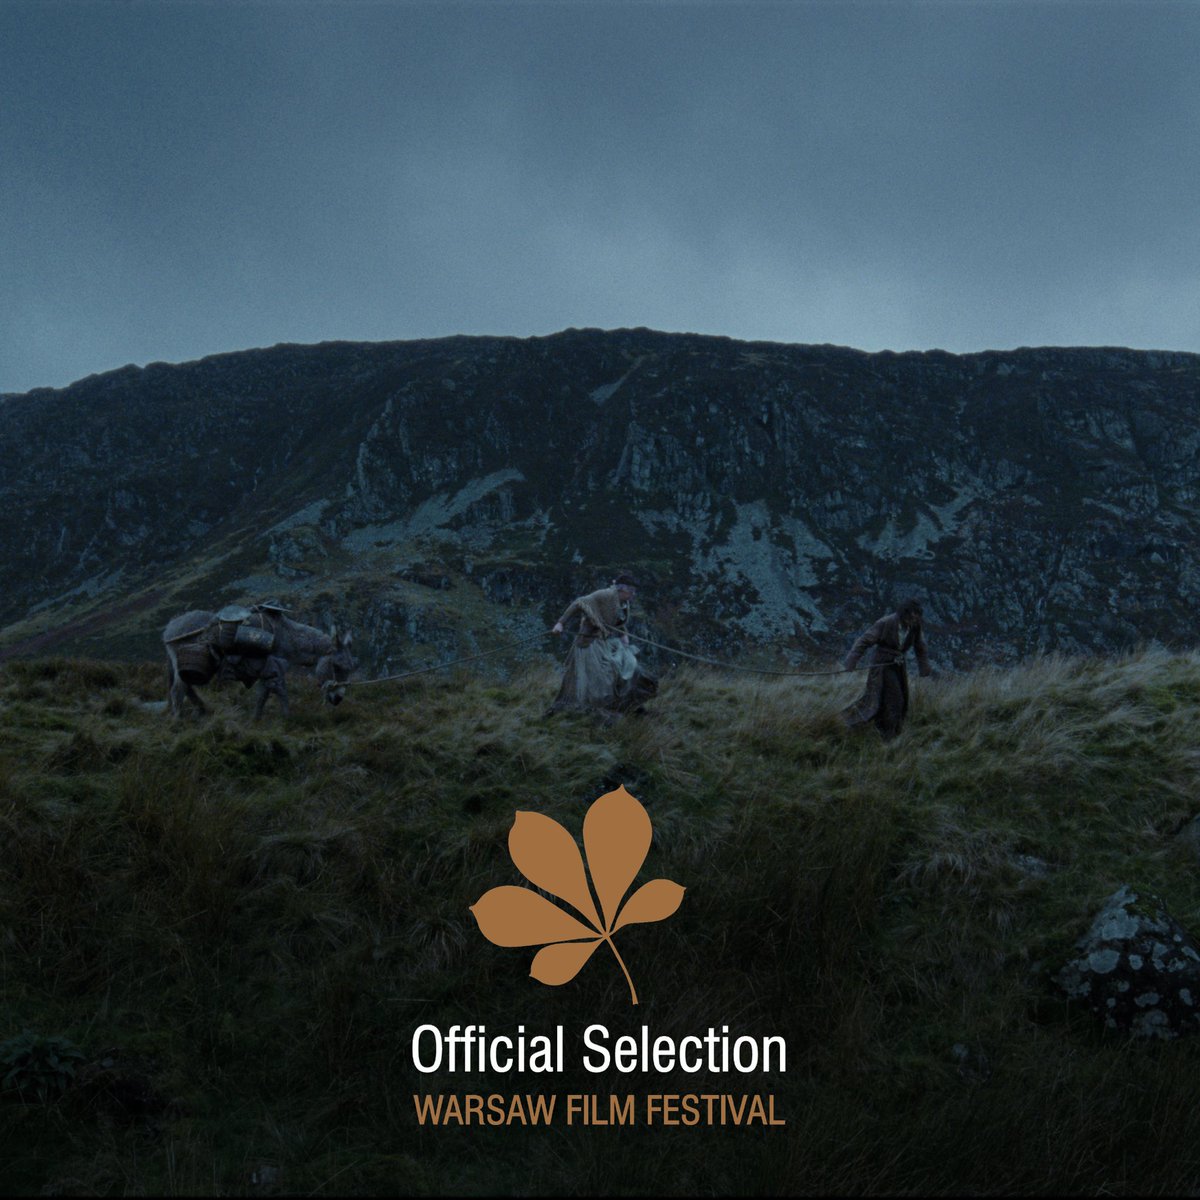 🇪🇺 EUROPEAN PREMIERE 🇪🇺 We’re delighted to be sharing #TheGoldenWest at the Academy Award Qualifying @WarsawIFF for its European premiere next month! We’re honoured to be representing Ireland as one of only twenty-three shorts from around the world playing in competition ⛏⛰